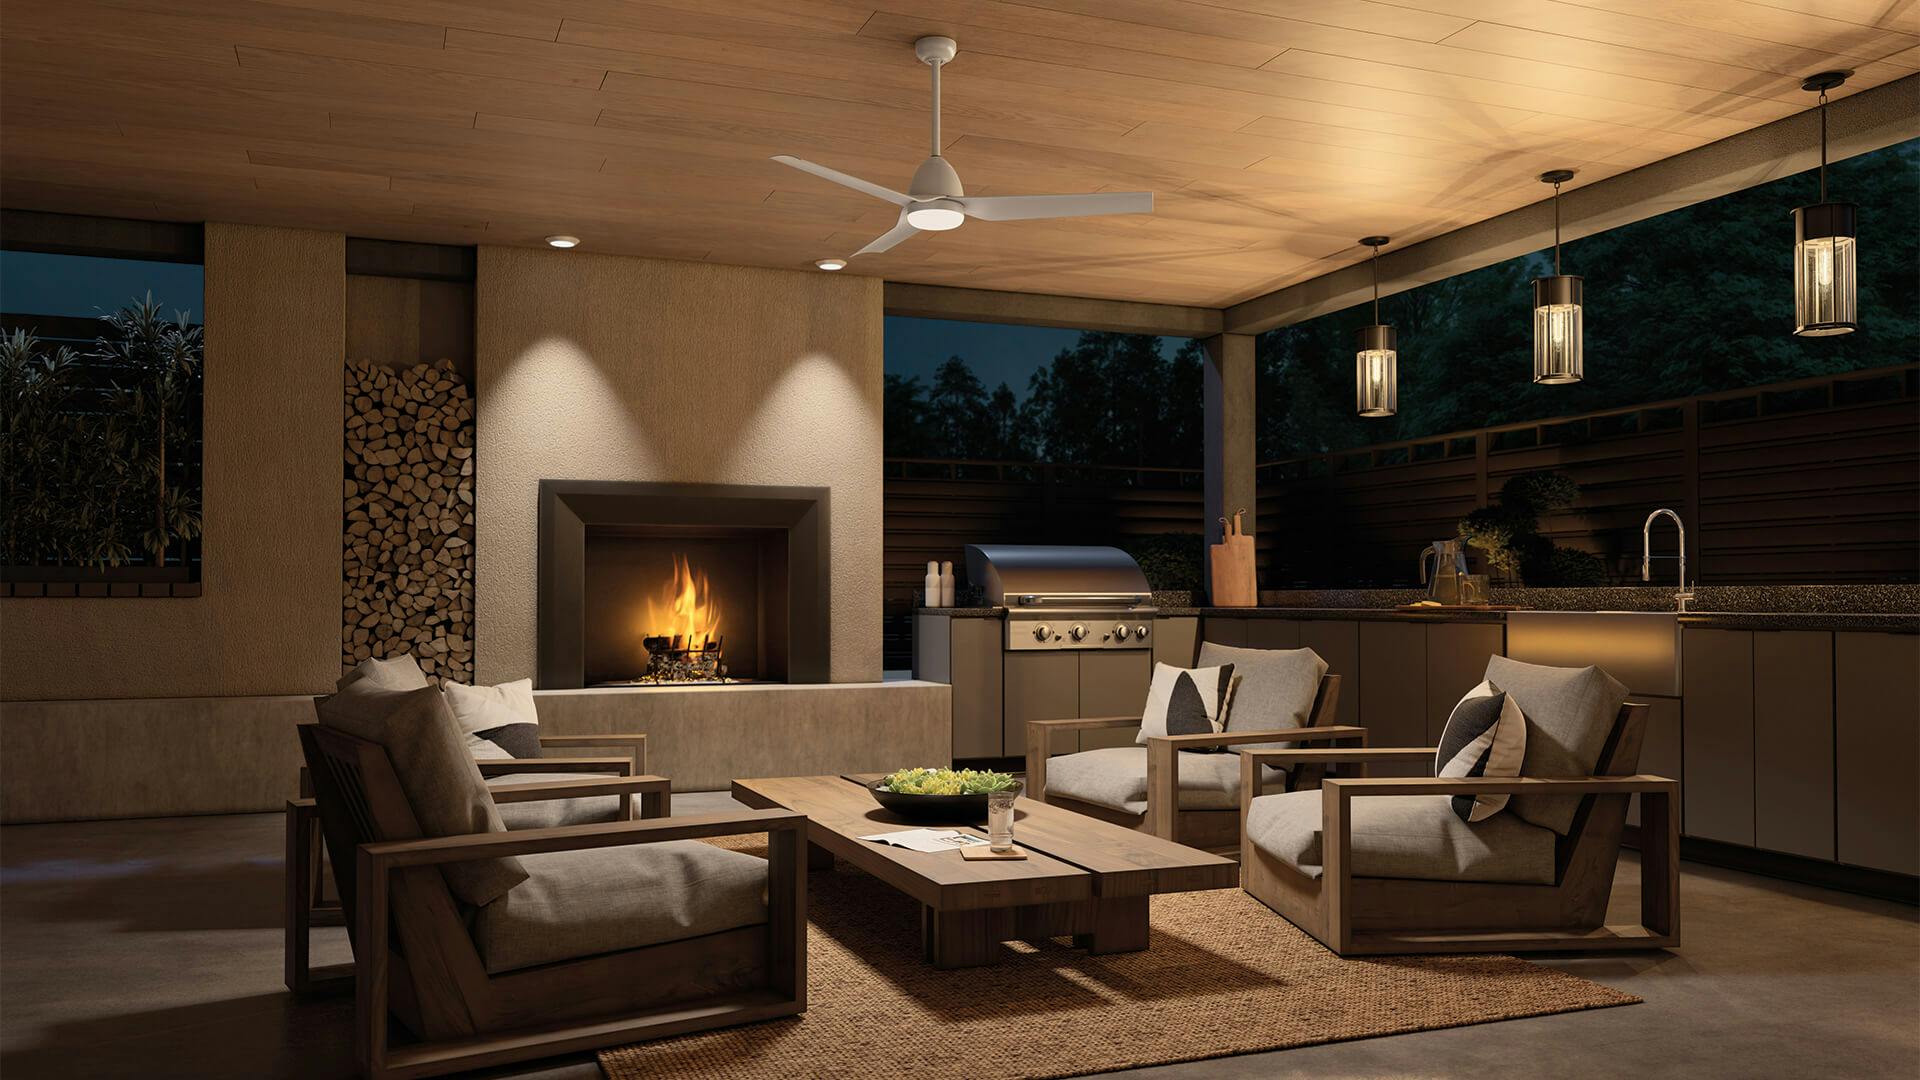 Covered patio with fireplace and kitchen and Fit fan in white finish at night